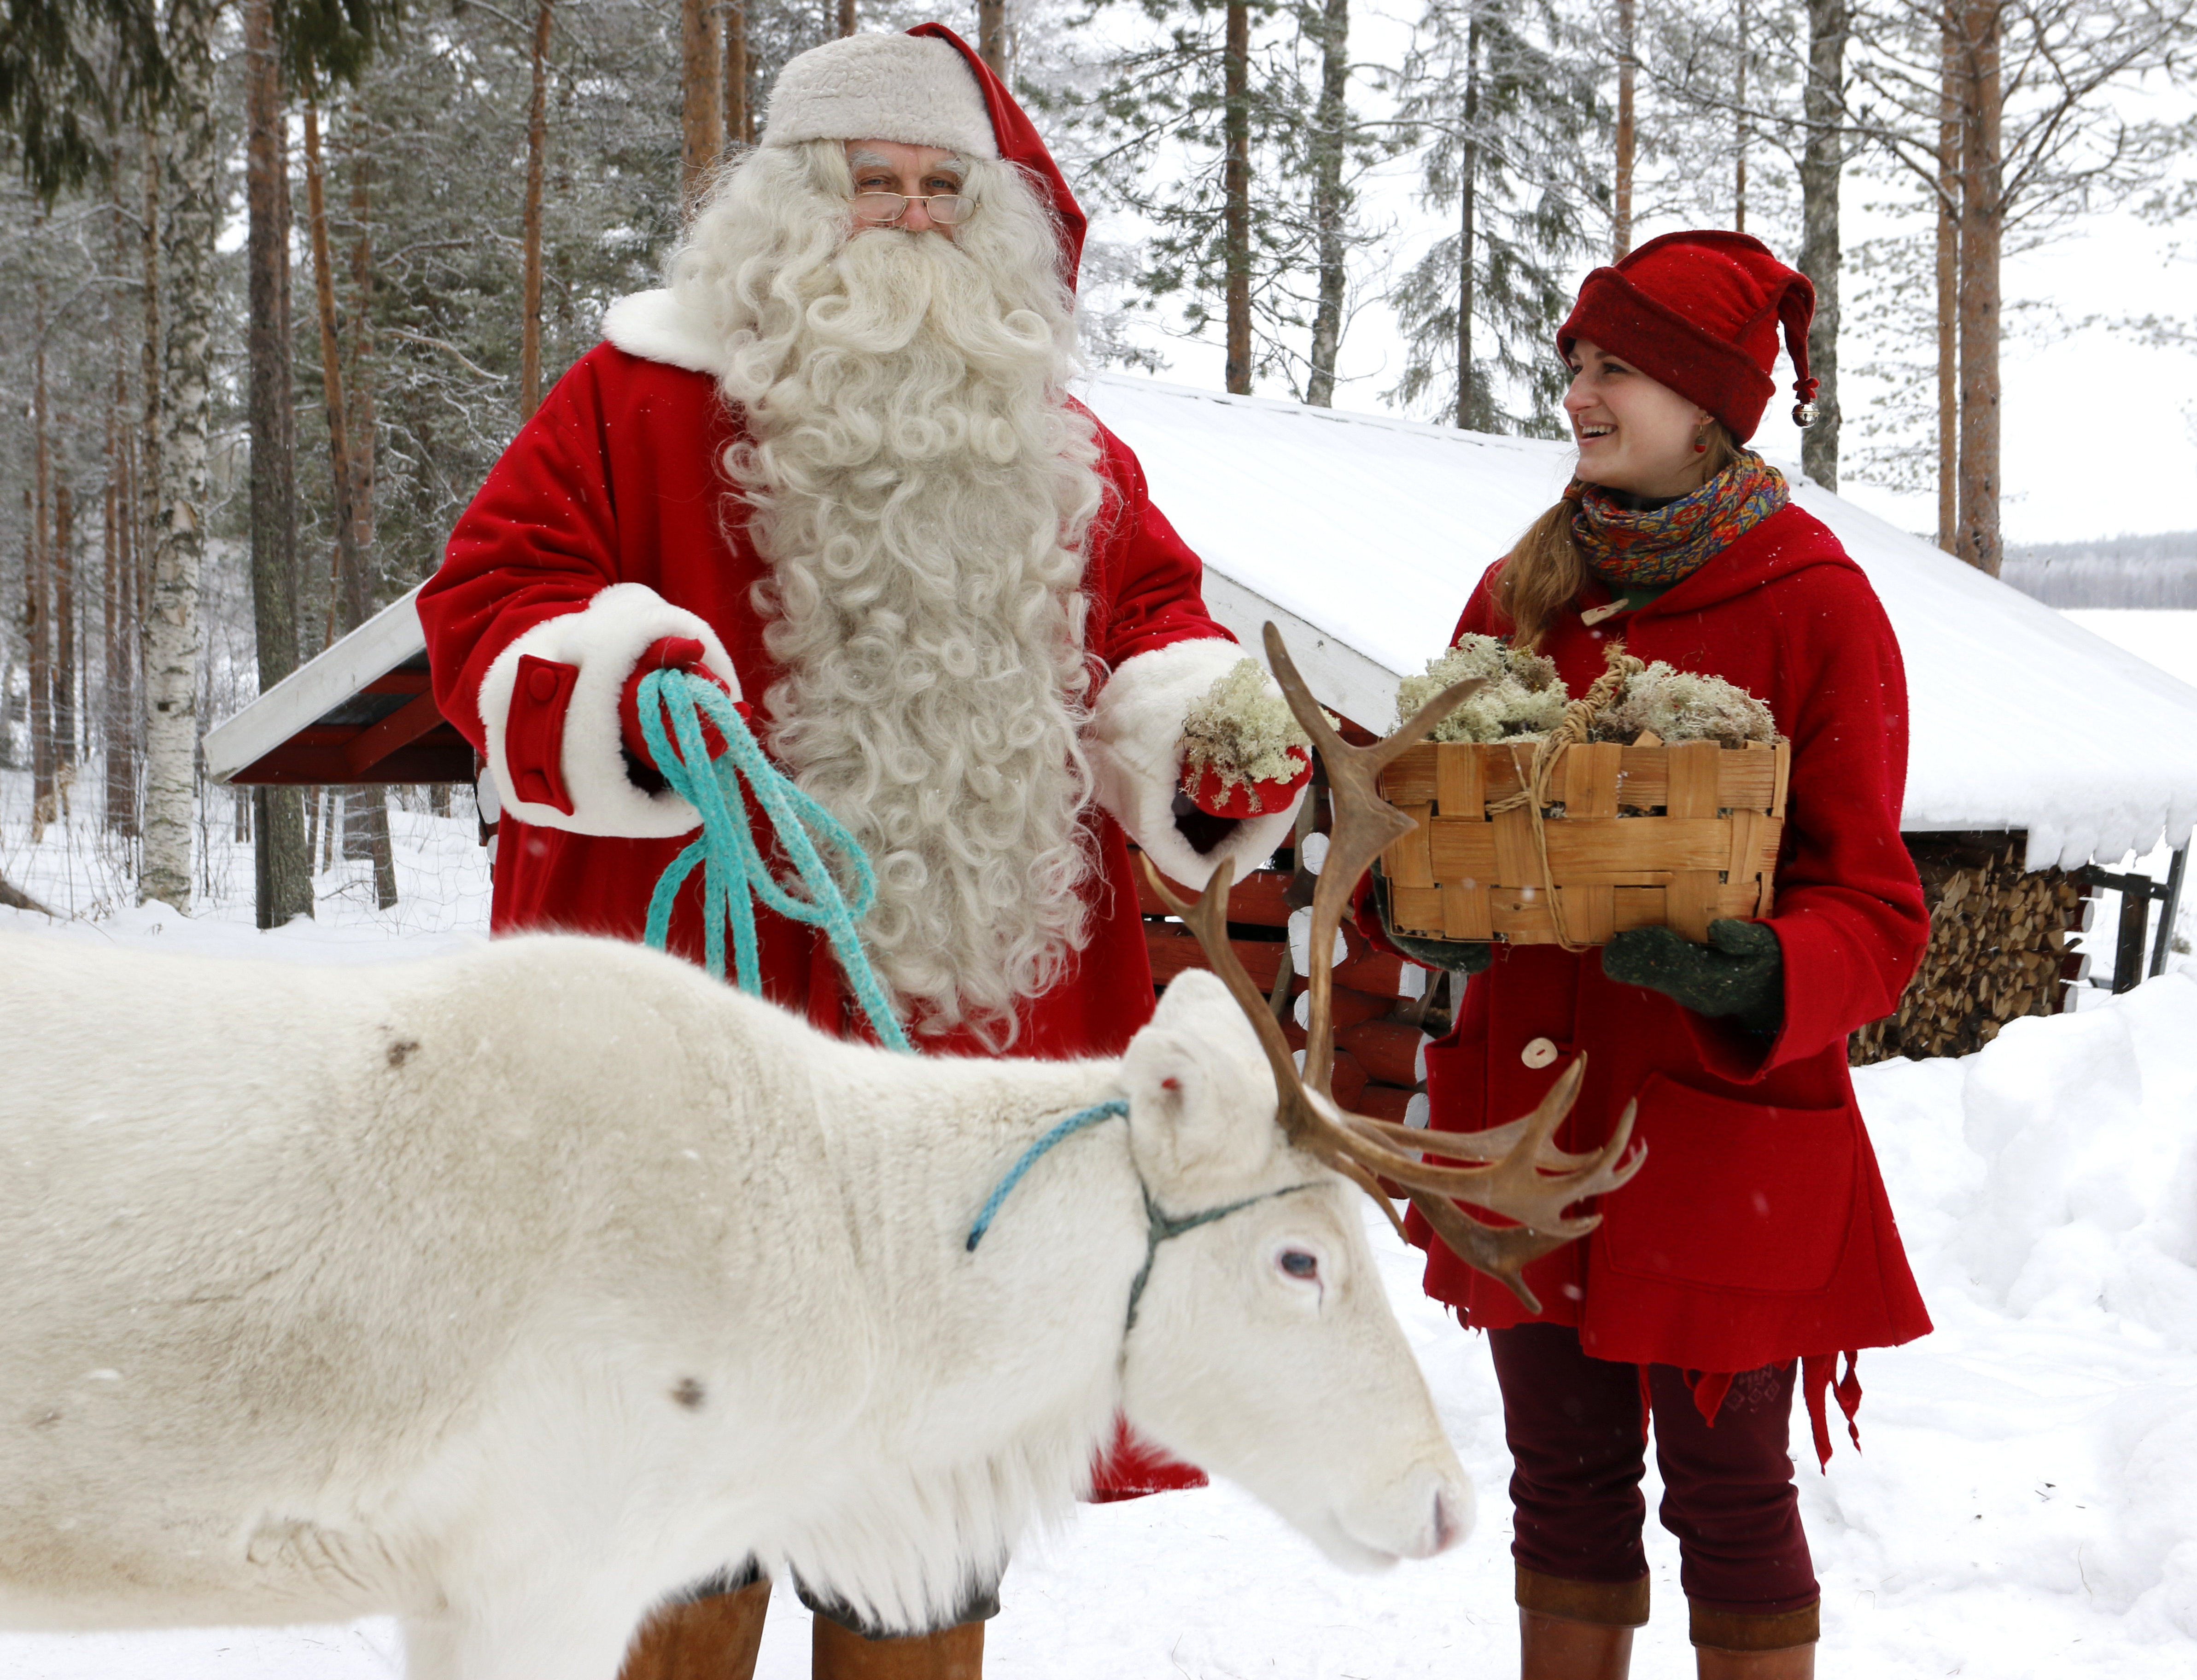 Photo: Santa Claus and elf feeding a reindeer in Lapland Finland